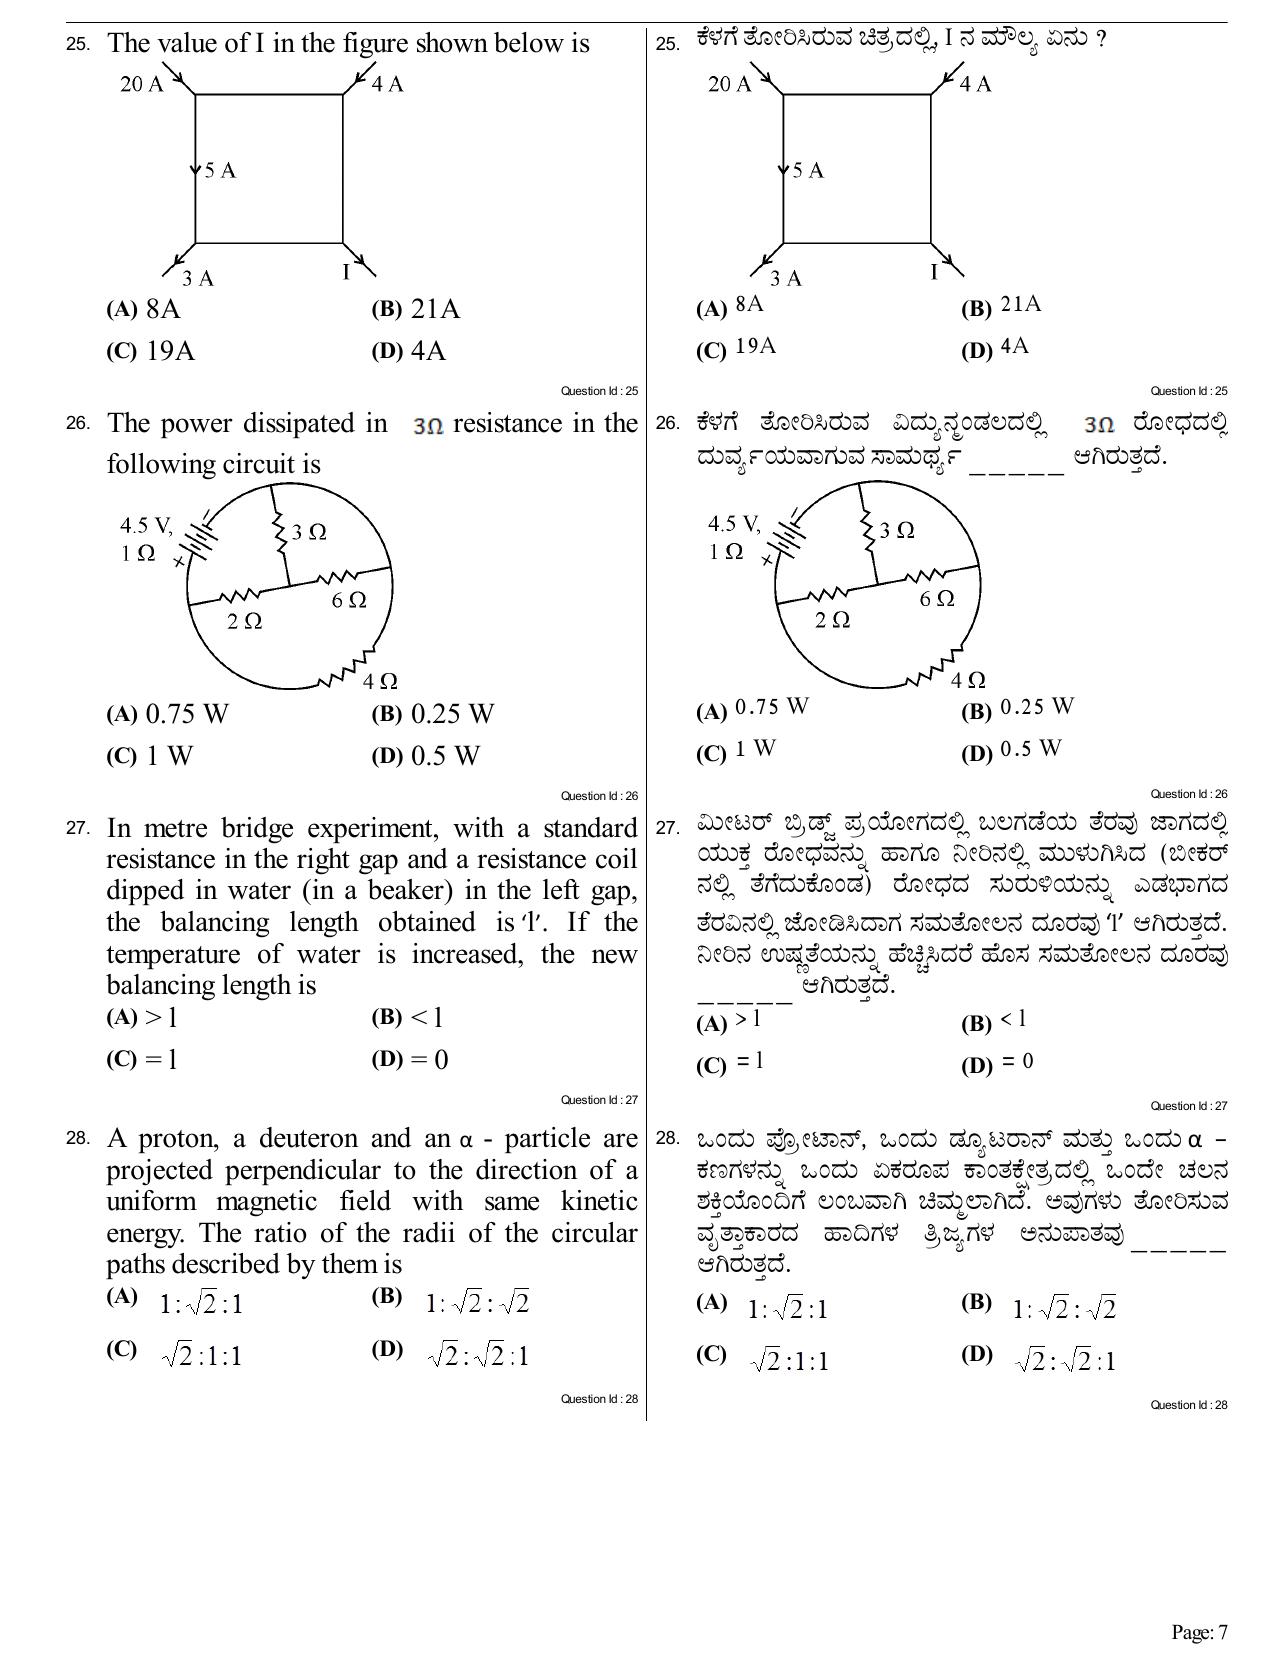 KCET Physics 2017 Question Papers - Page 7